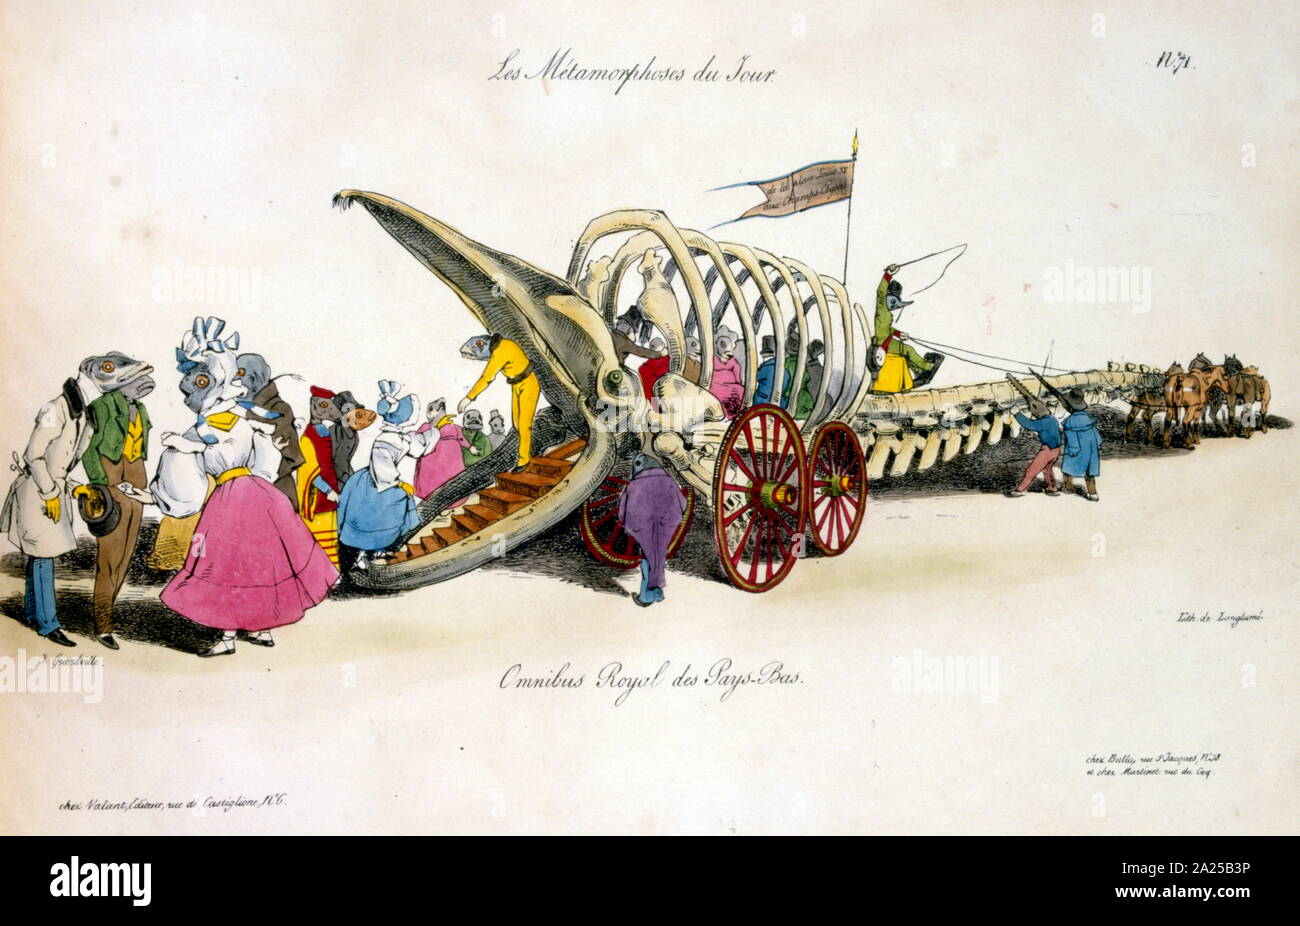 Jean-Ignace-Isidore Gerard Grandville, 'Les Metamorphoses du jour' 1829.illustration from a famous series of political caricatures Stock Photo